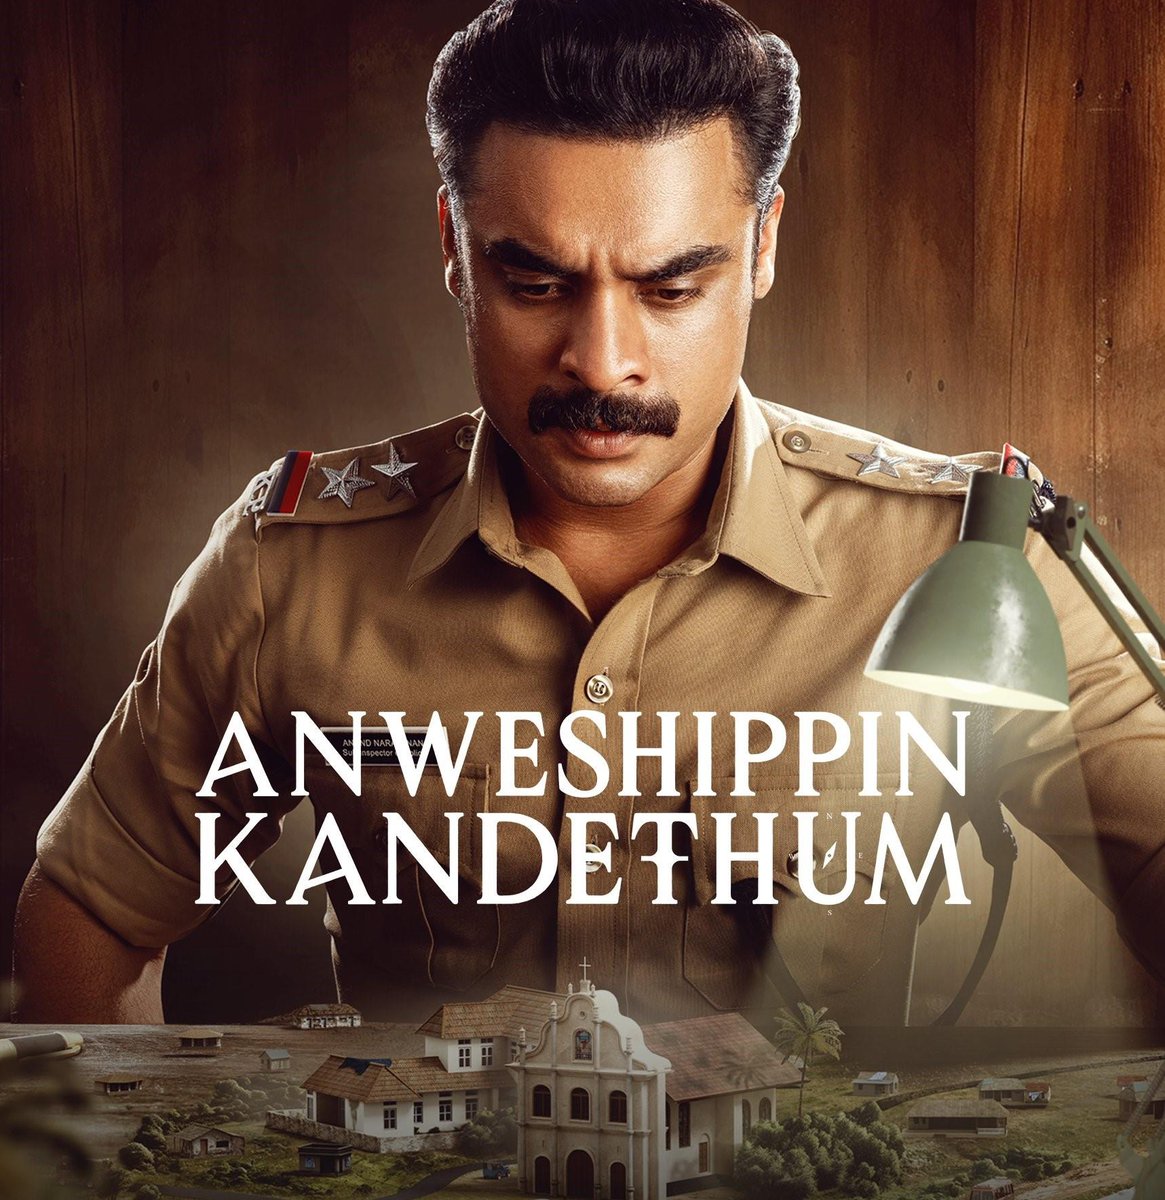 #AnweshippinKandethum dives you in some of the best crime cases which keeps you engaging till the end 🔥

The Direction by #DarwinKuriakose is next level and #TovinoThomas again assures us that his script choices are going to be the best 💥🔥